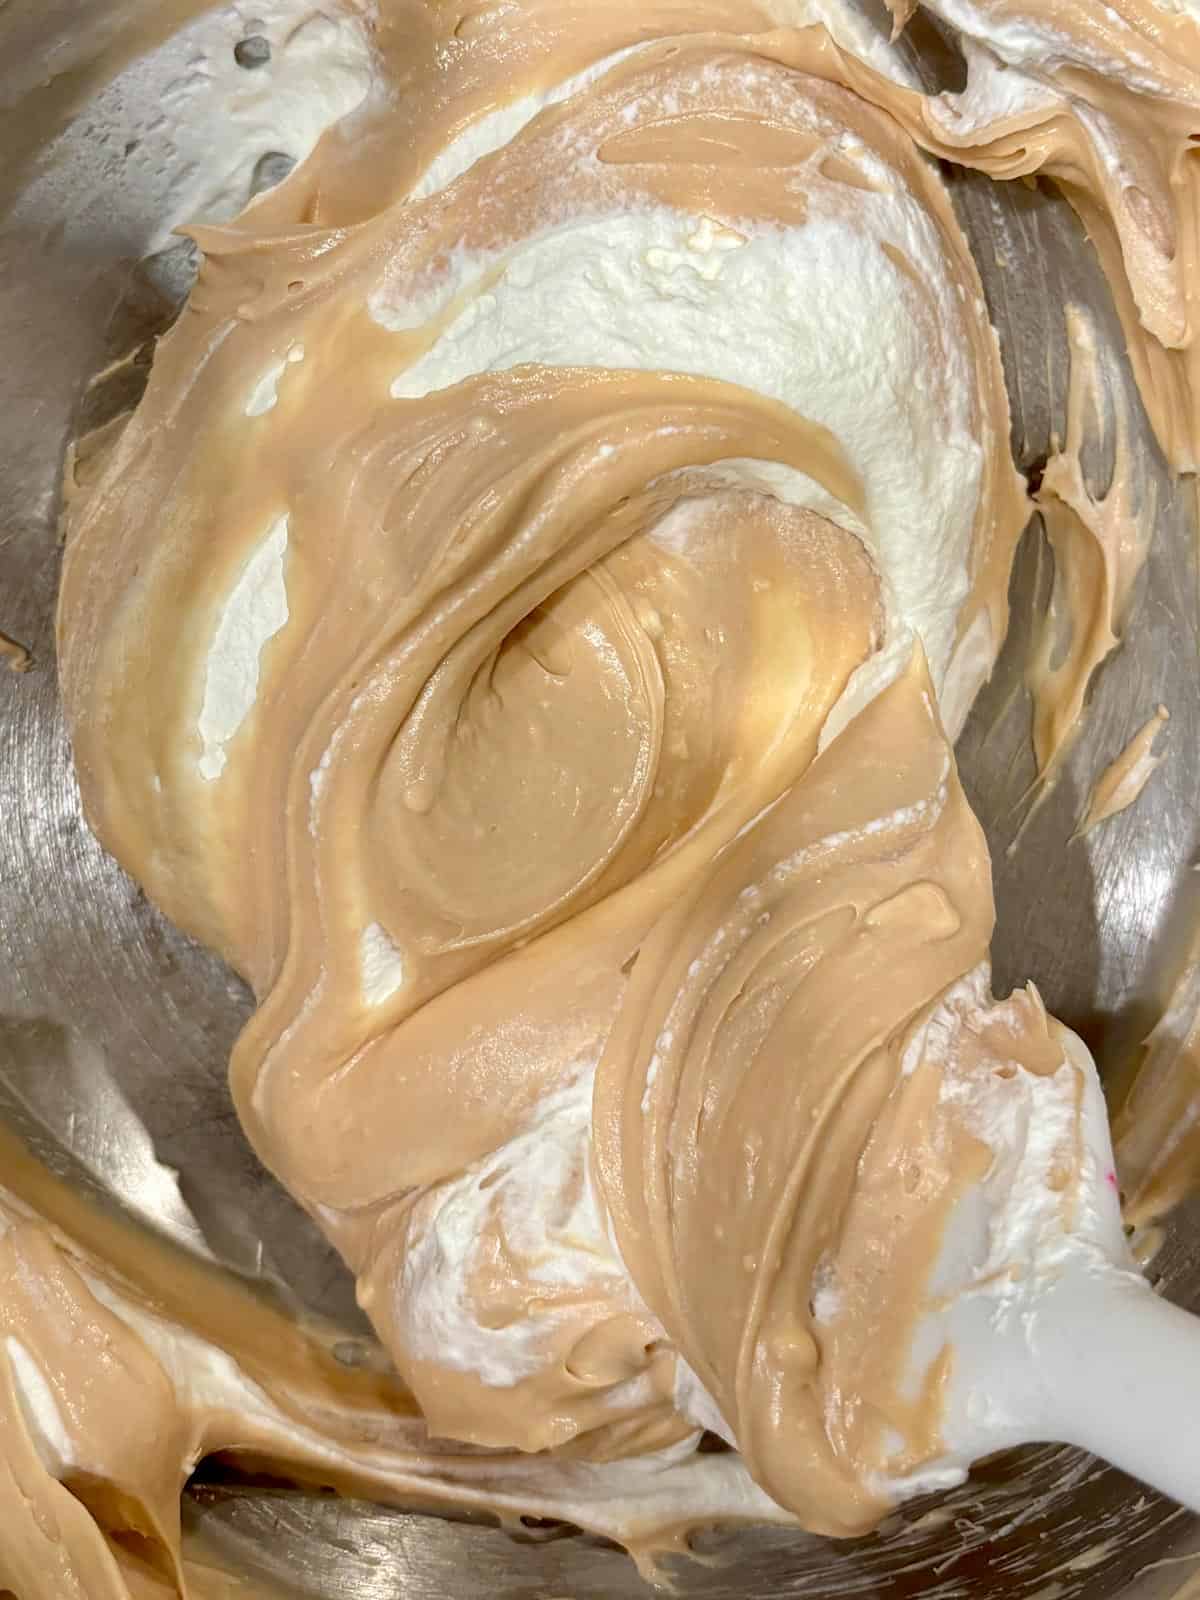 Caramel and cream cheese in a mixing bowl with whipped cream being folded in.